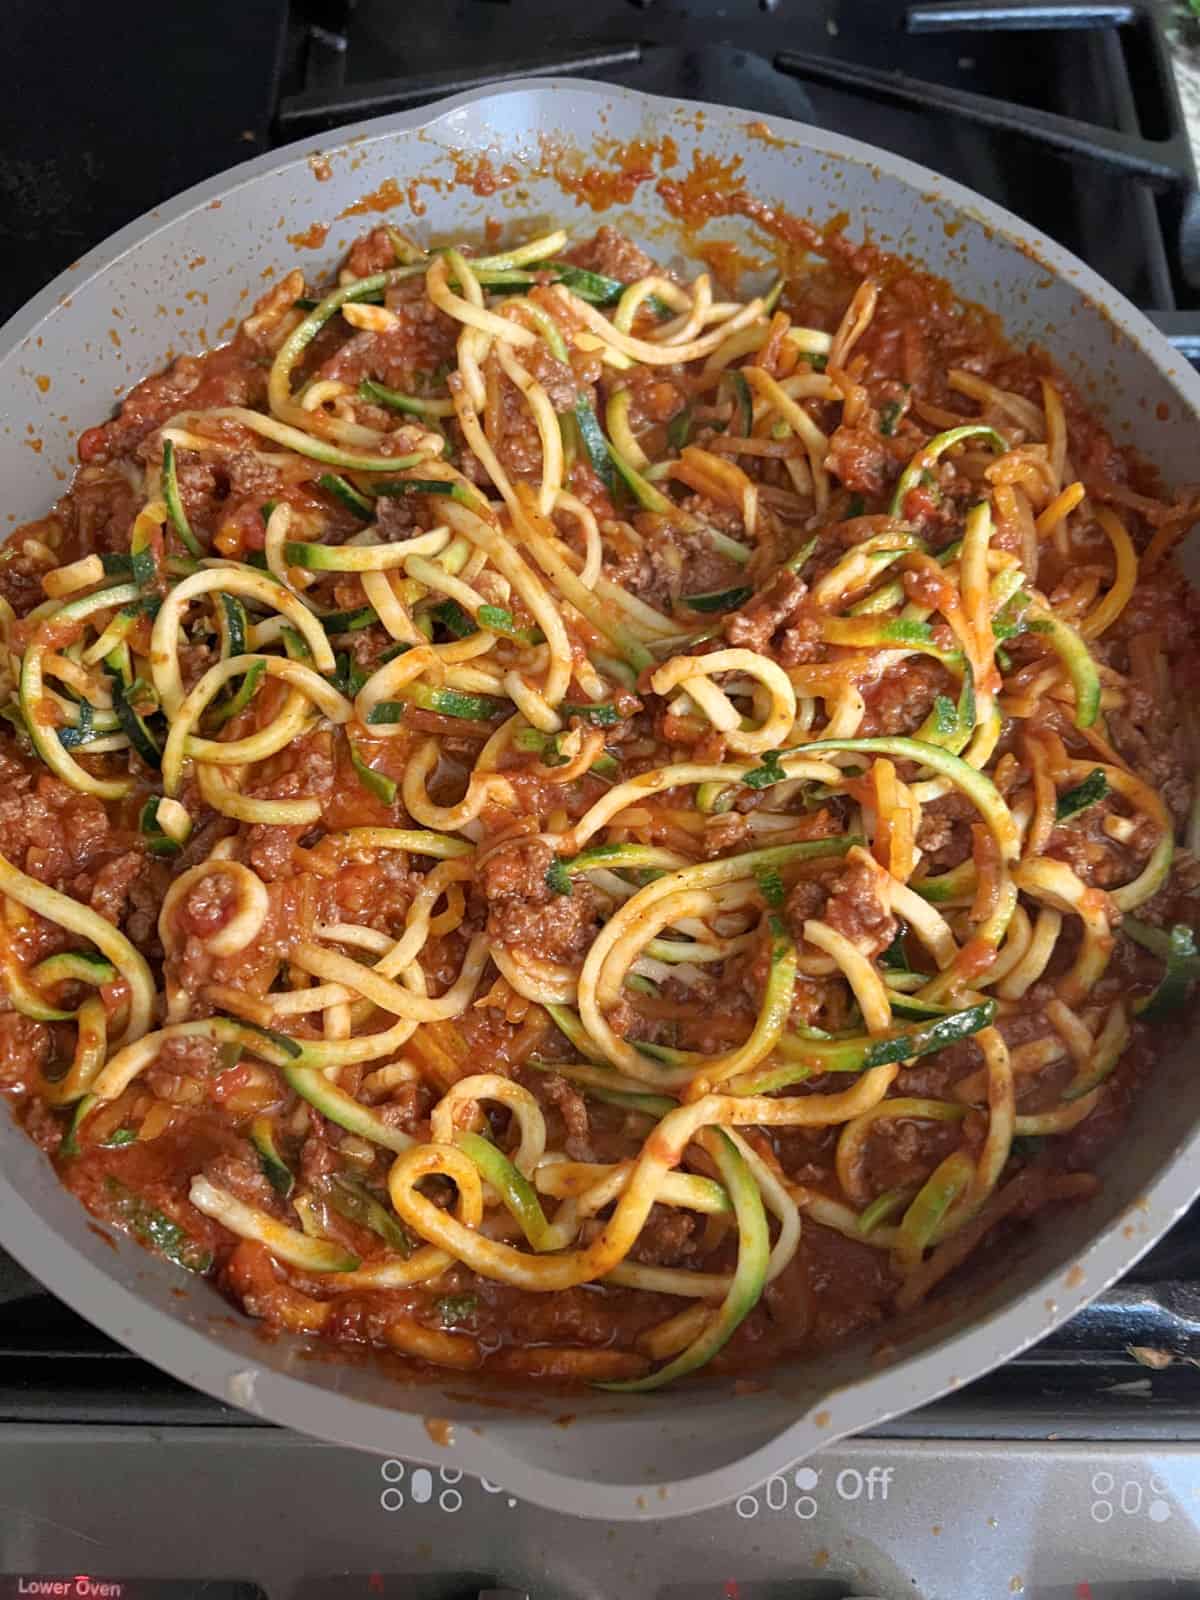 Spiralized zoodles and butternut squash noodles added to the spaghetti sauce.